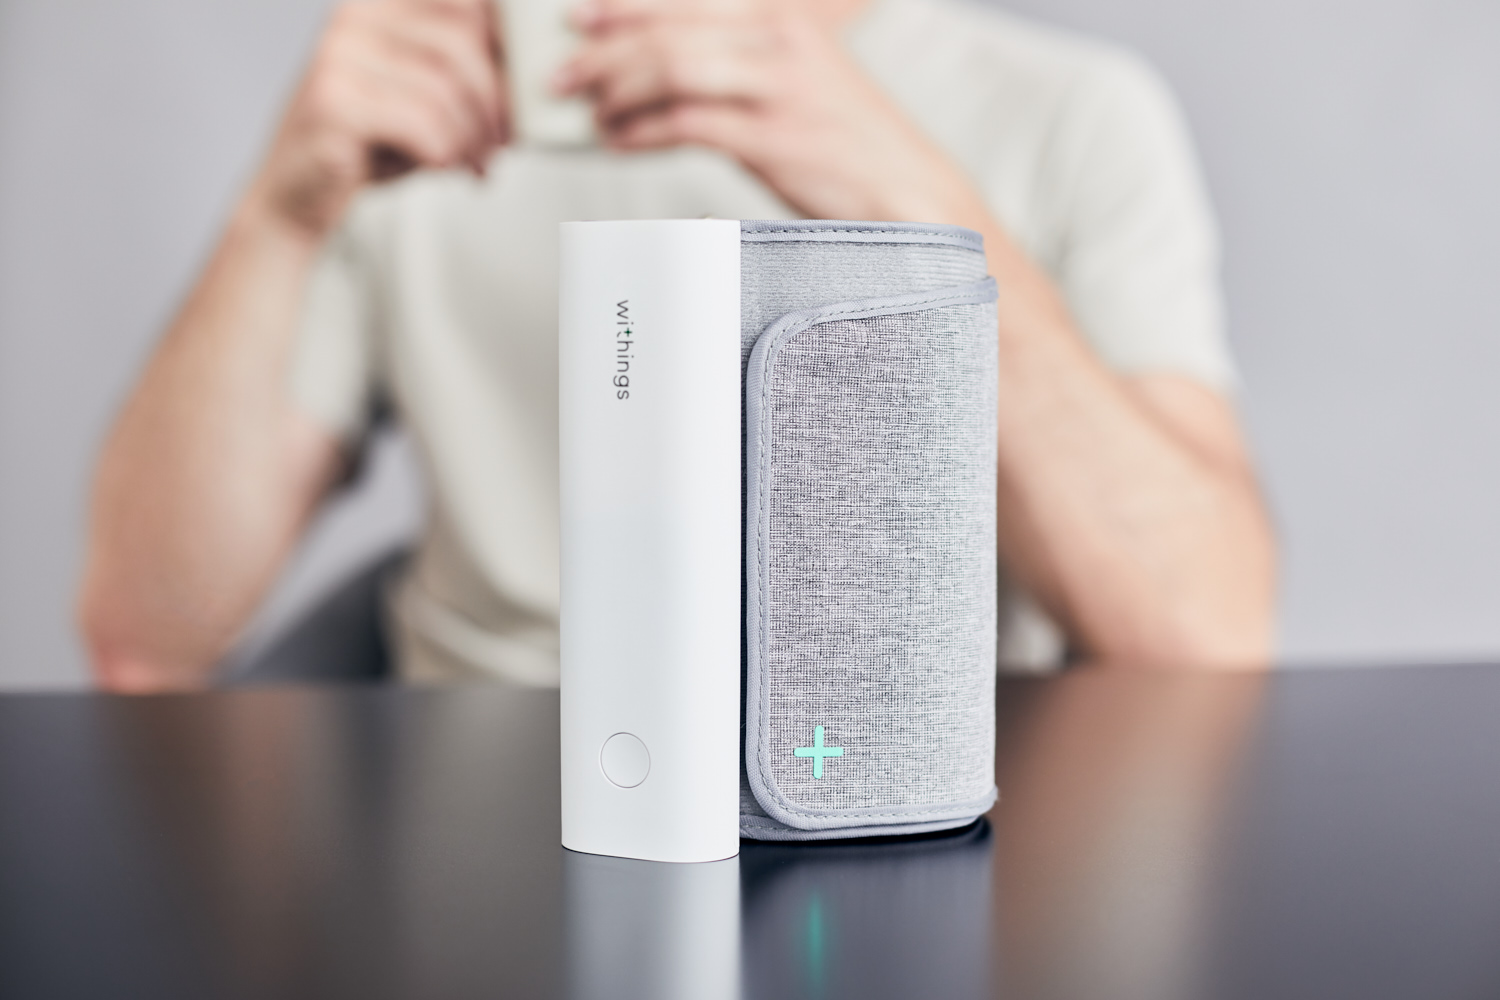 Withings' new BPM Core blood pressure monitor comes with ECG